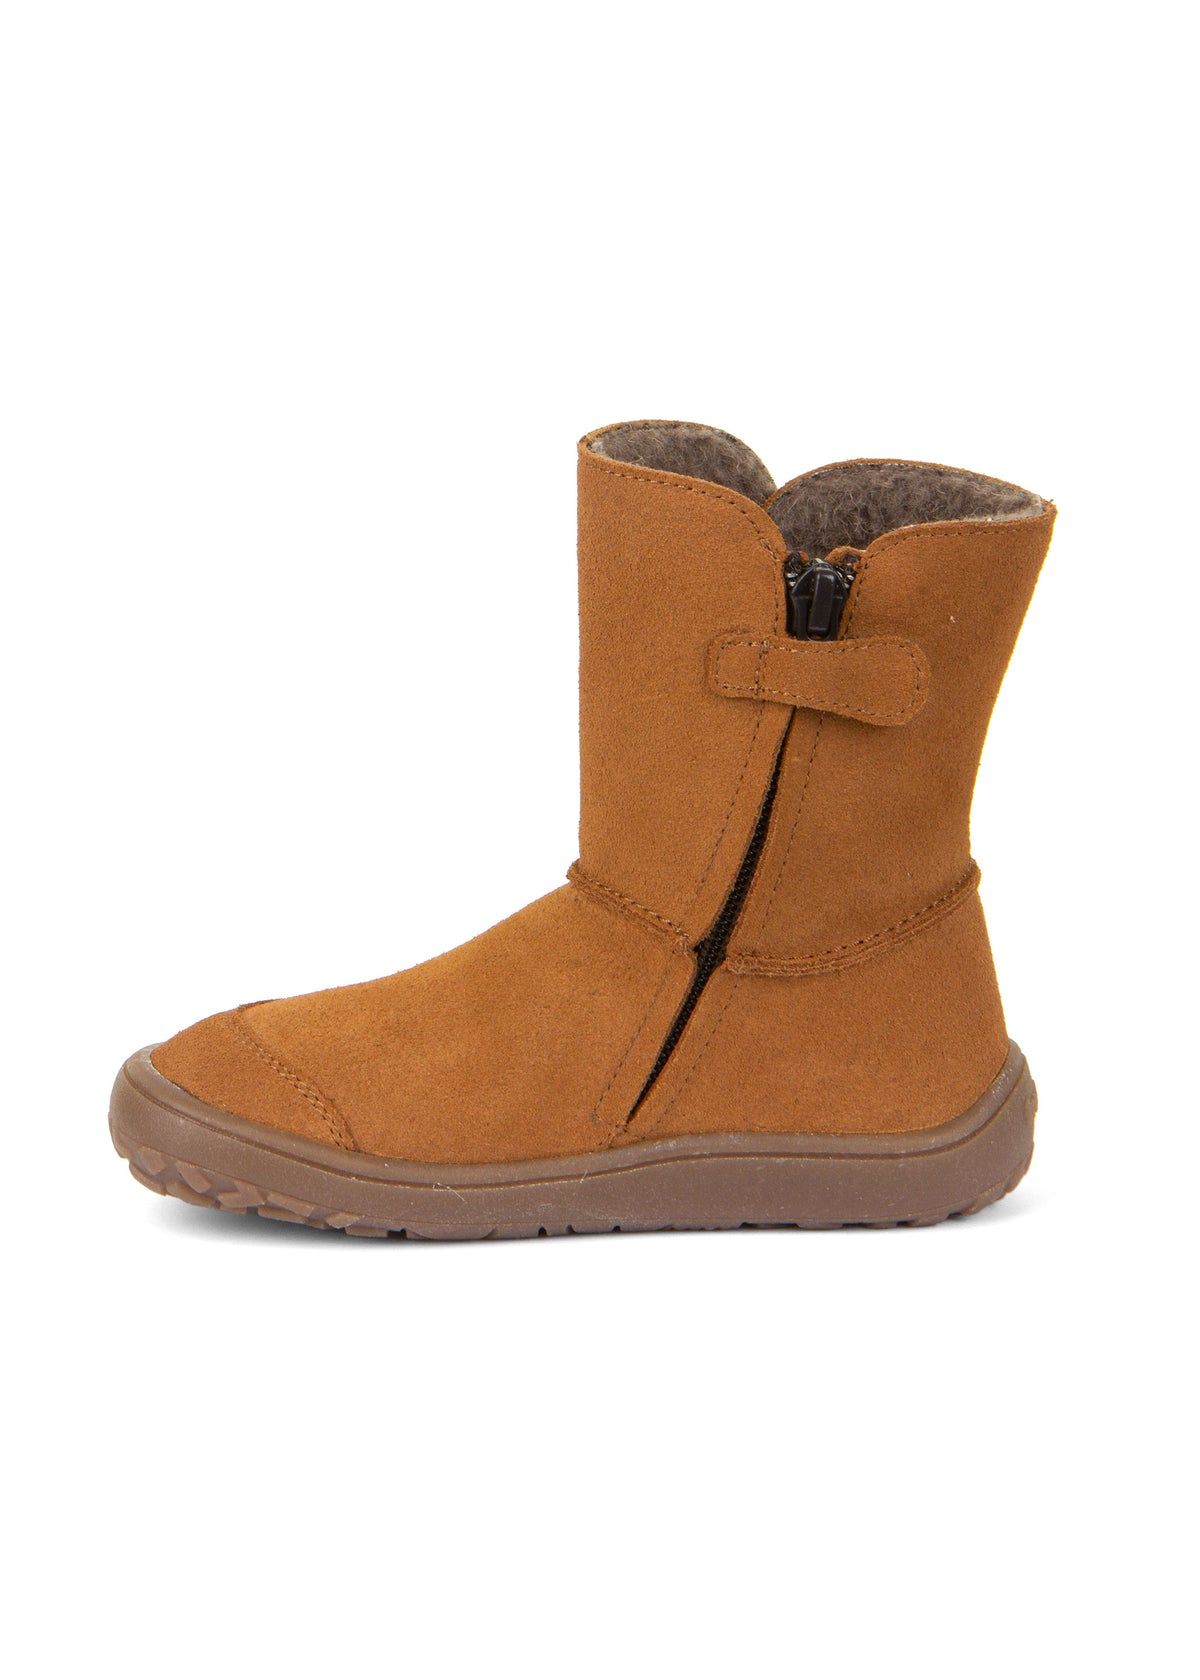 Barefoot shoes - leather winter boots, TEX Suede - cognac brown